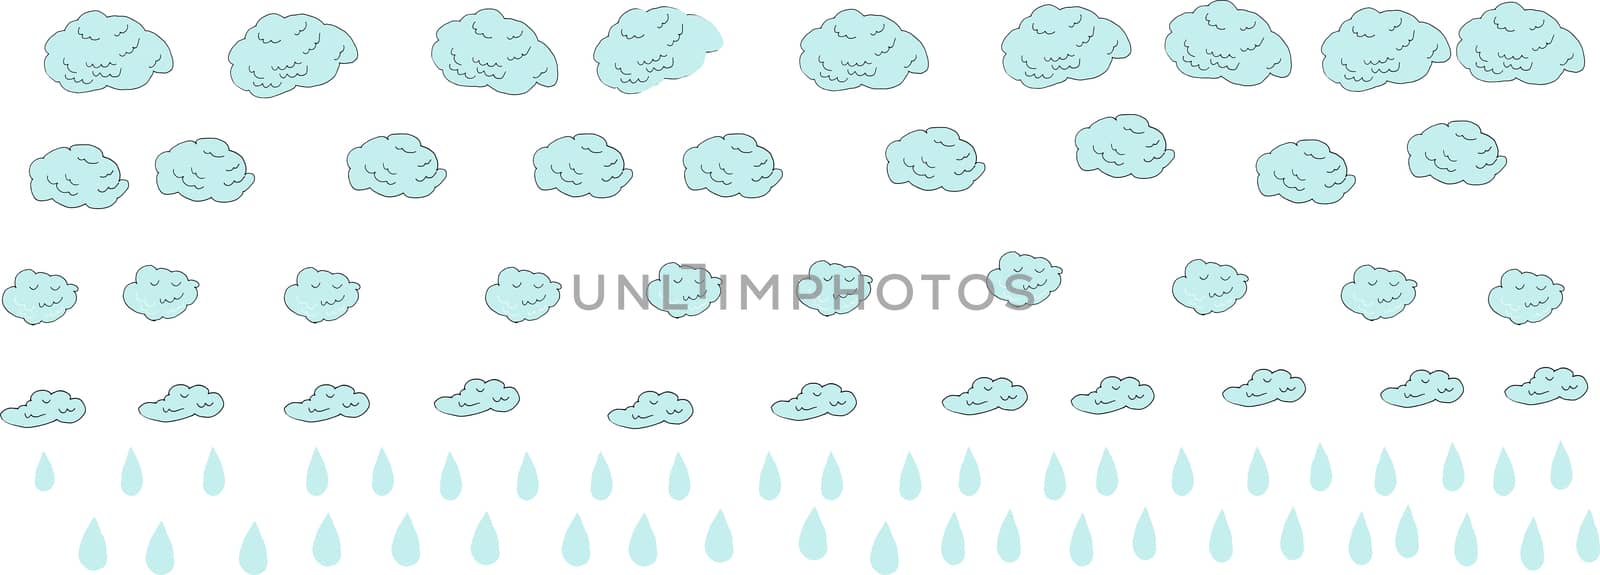 Doodle hand drawn sign of clouds and rain drops isolated on a white background. illustration of weather forecast banner.